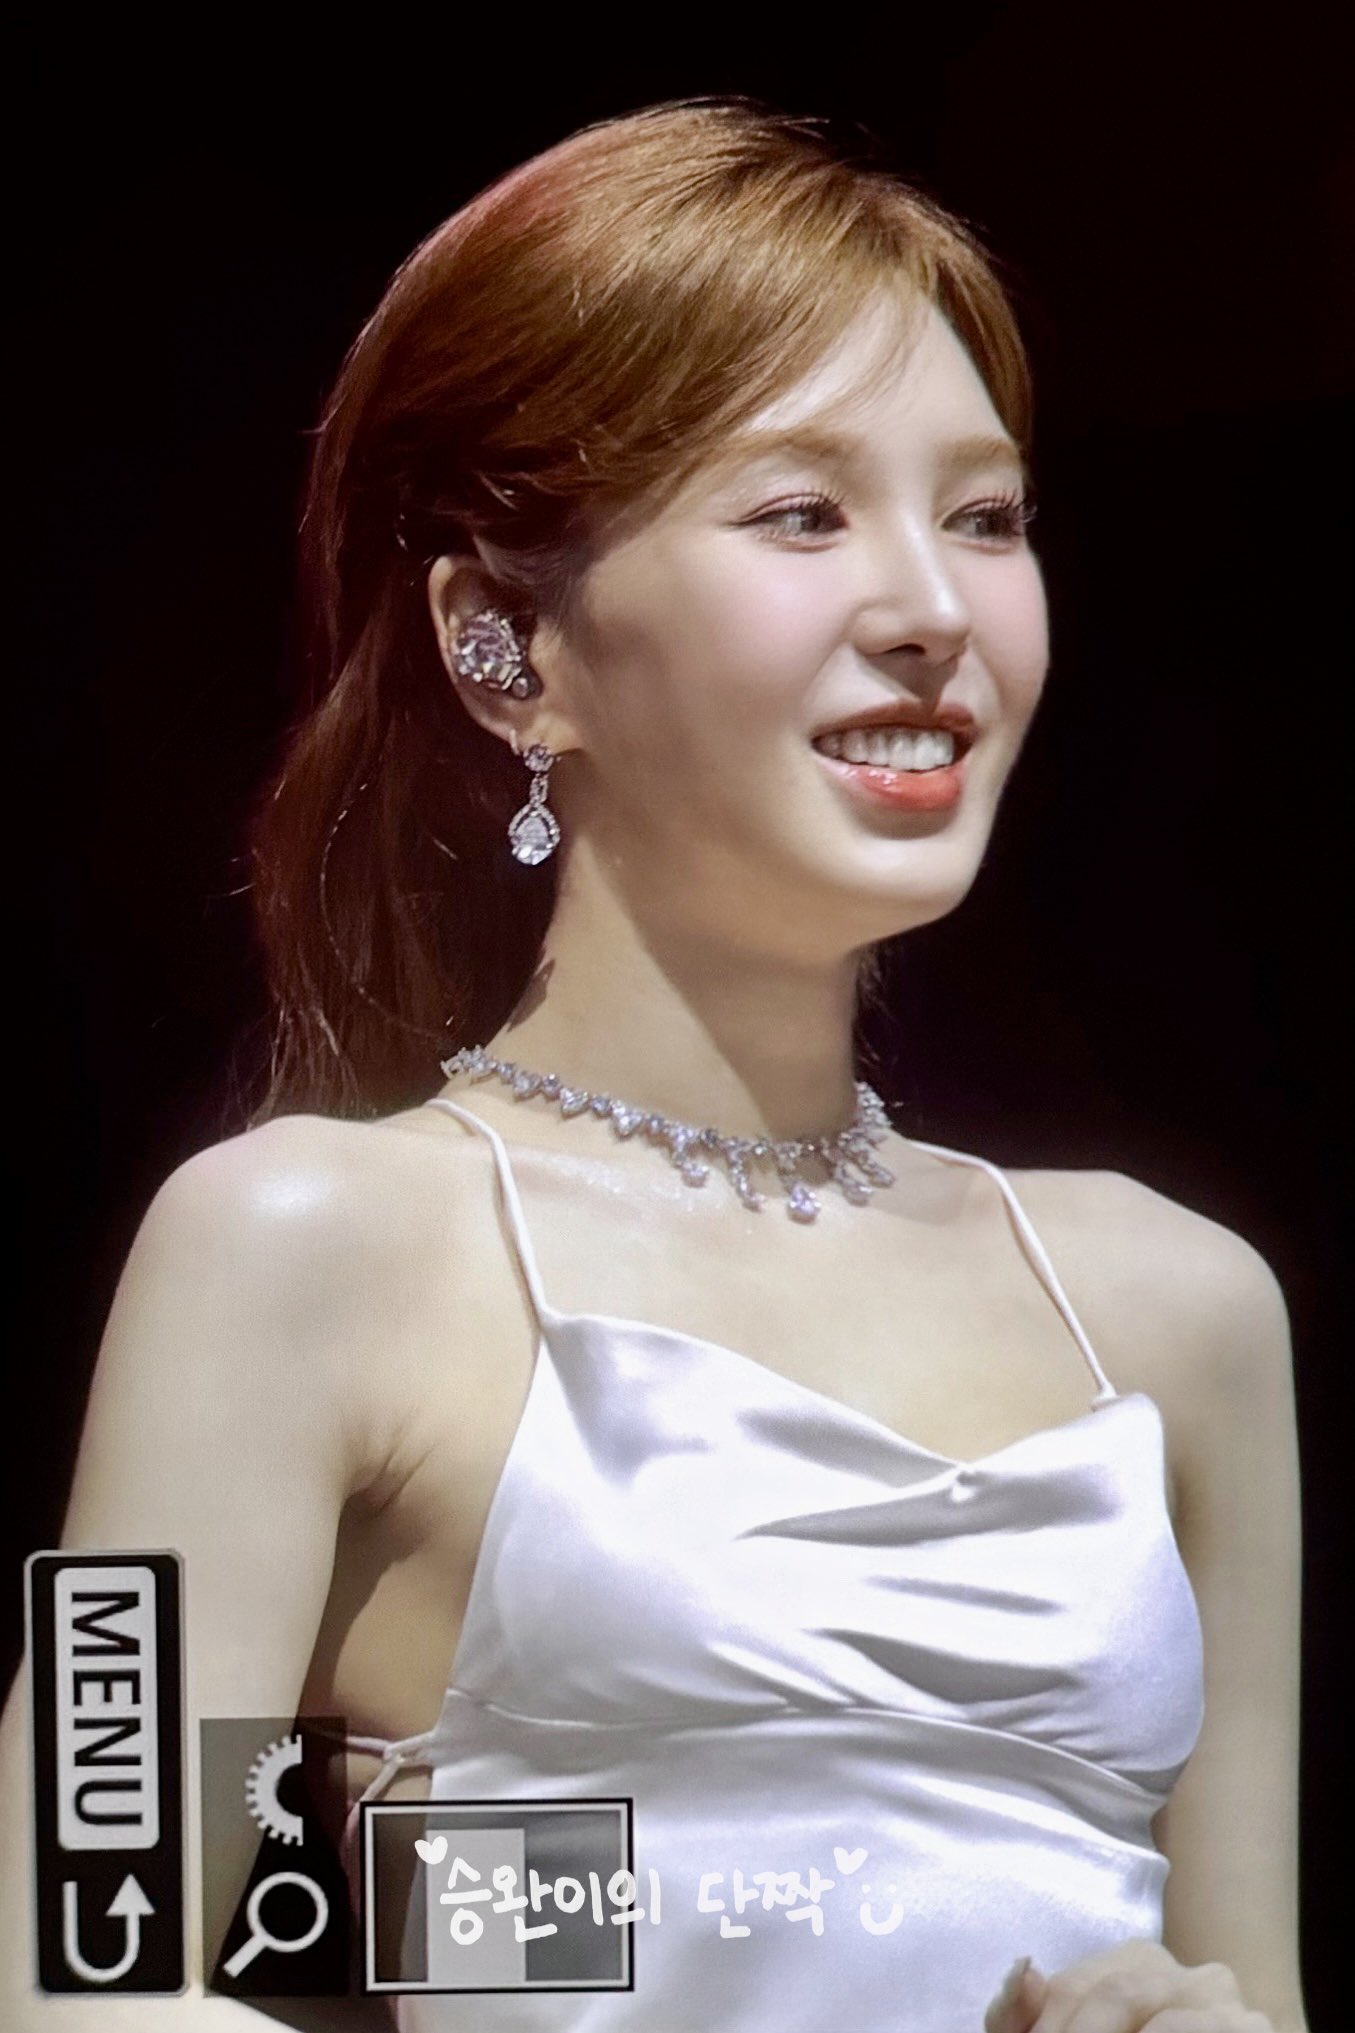 Wendy is so pretty